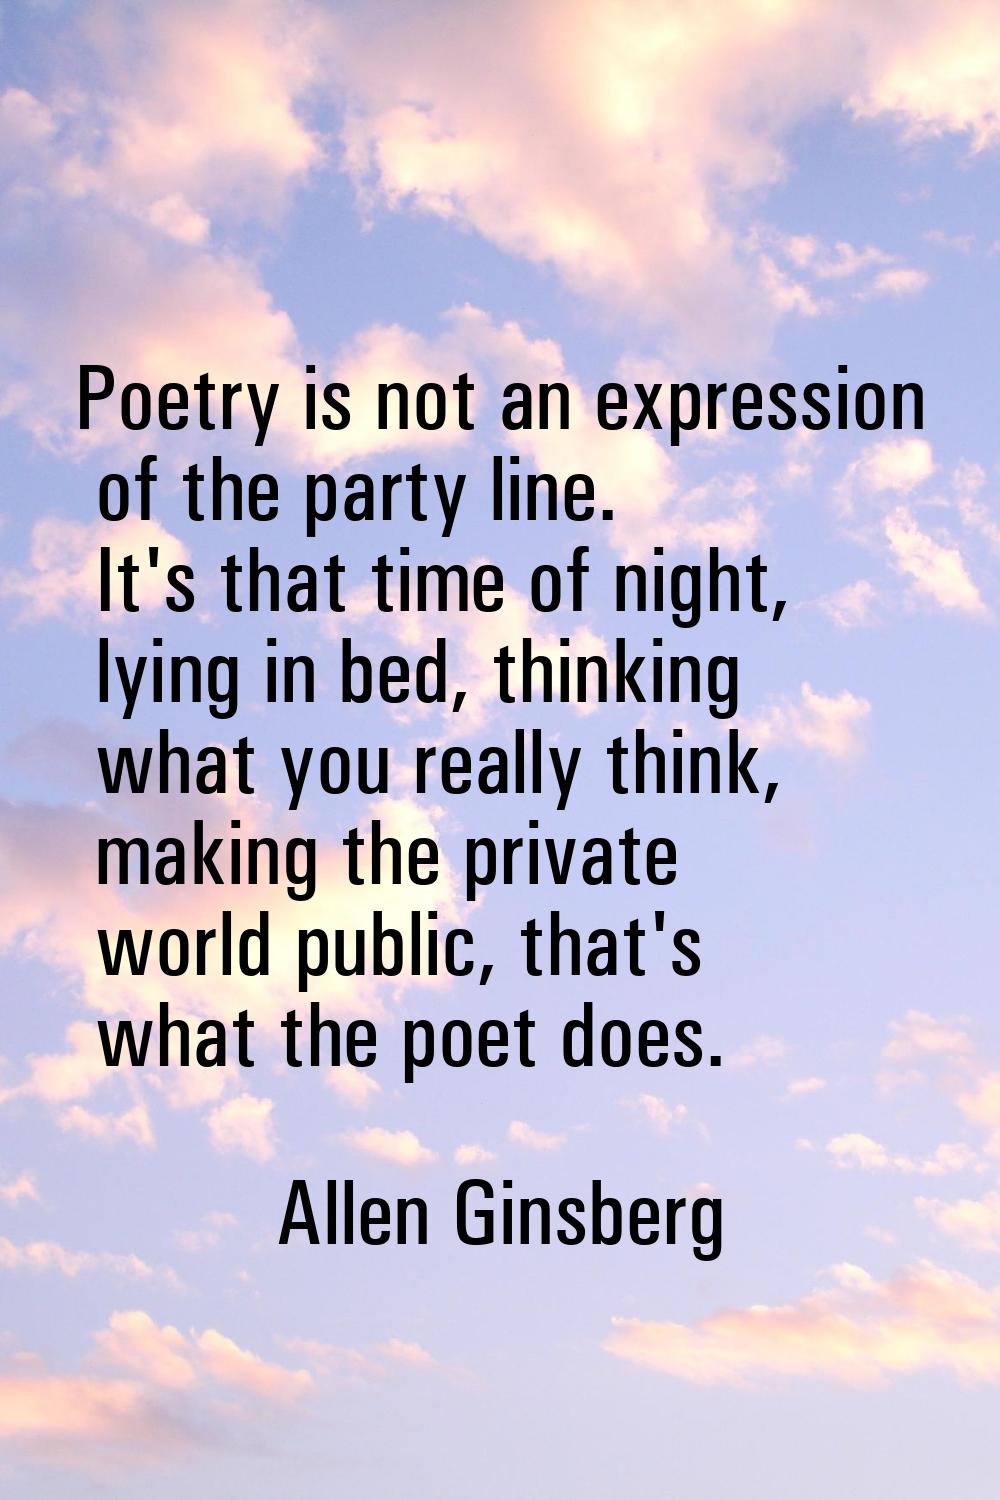 Poetry is not an expression of the party line. It's that time of night, lying in bed, thinking what